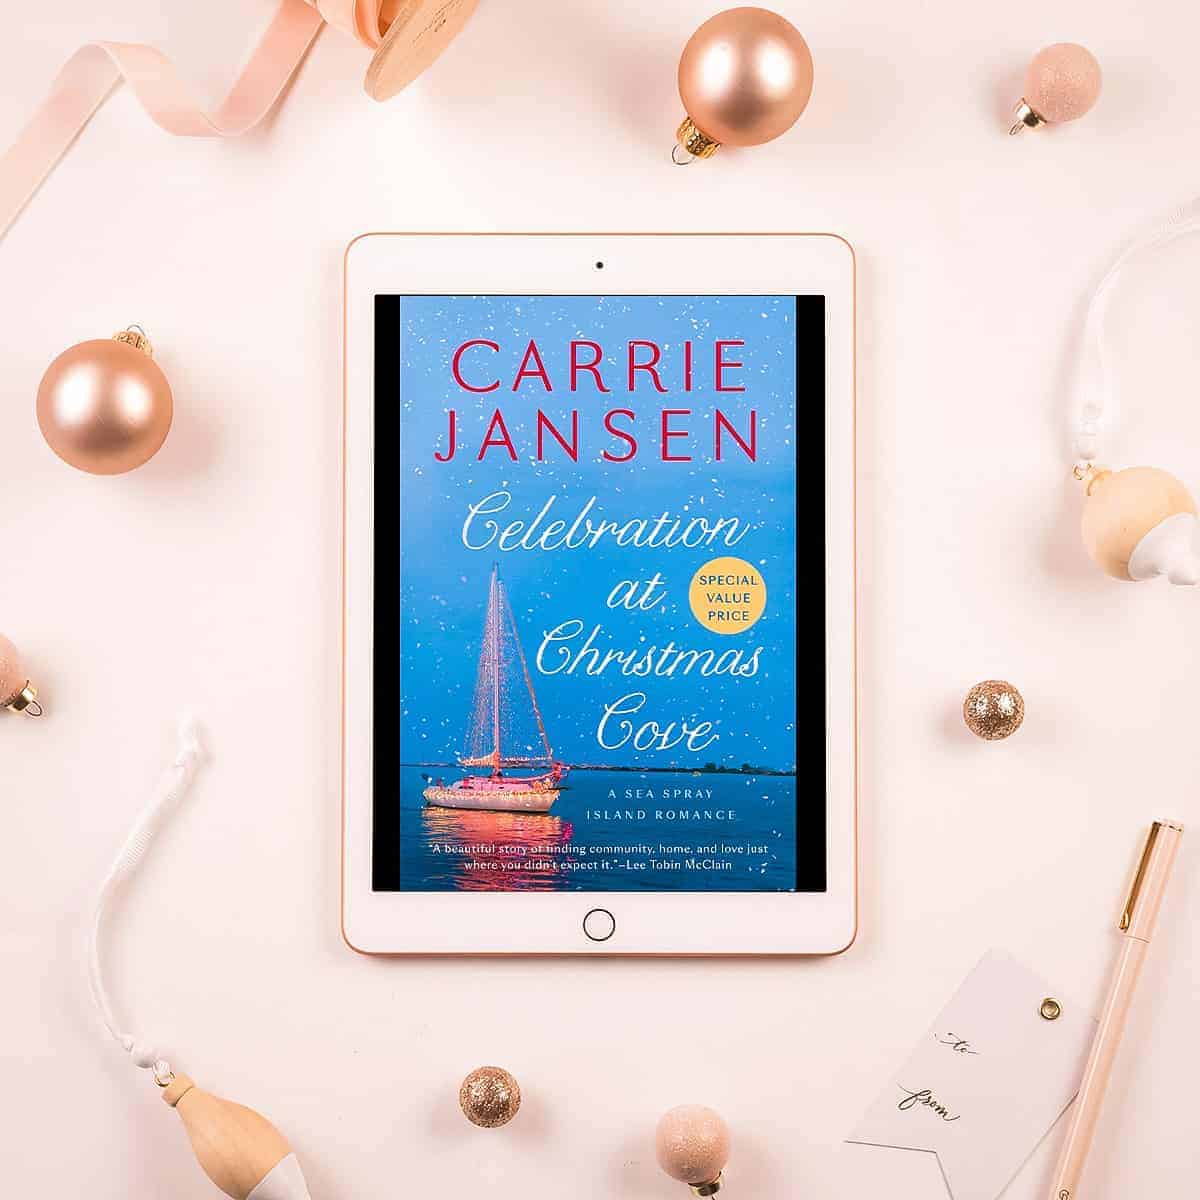 Celebration at Christmas Cove by Carrie Jansen-featured